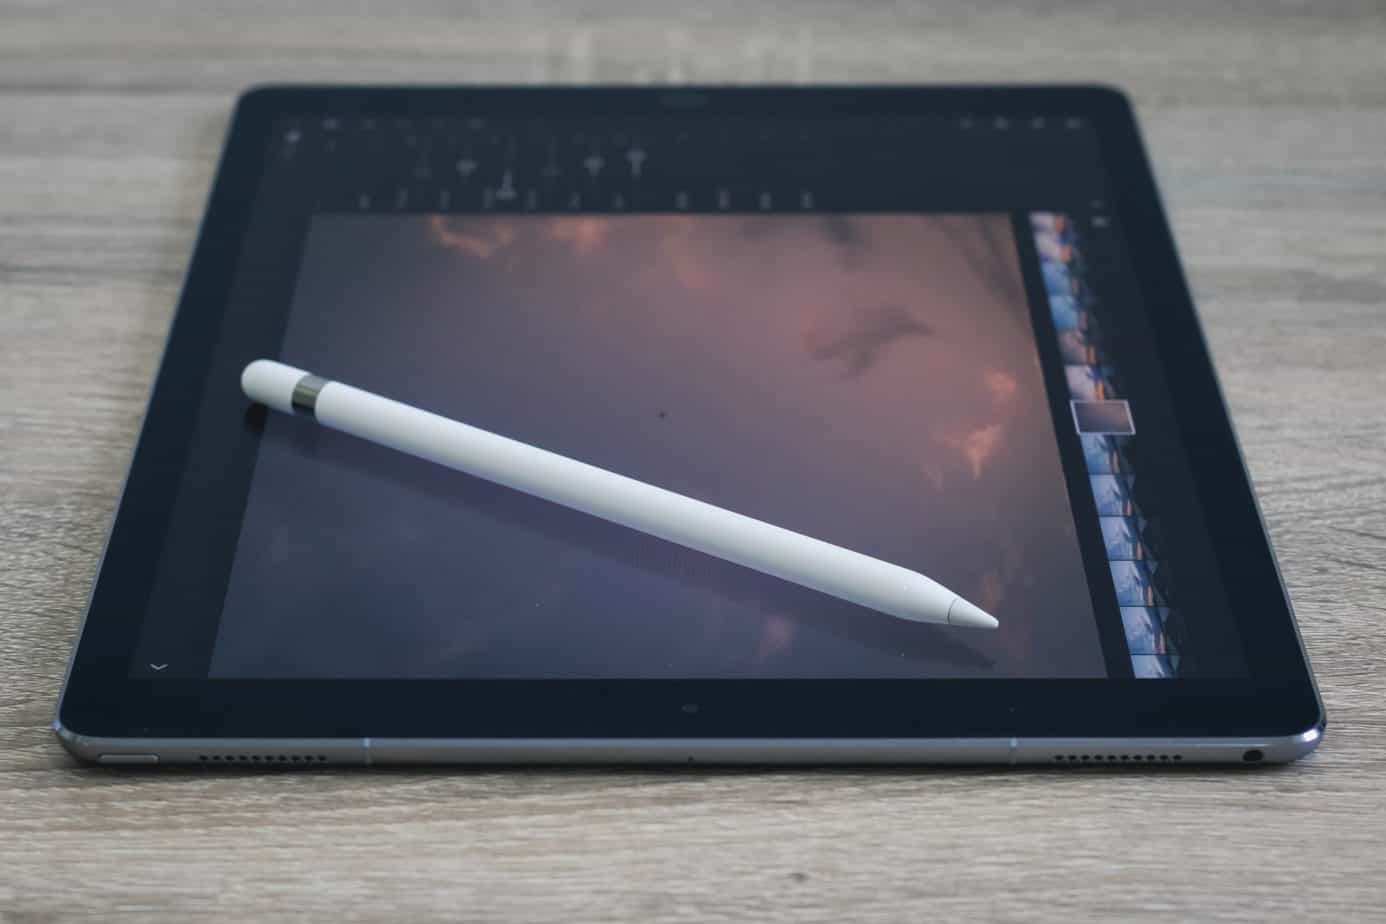 Mark Up Your Bible With the Apple Pencil Using This App